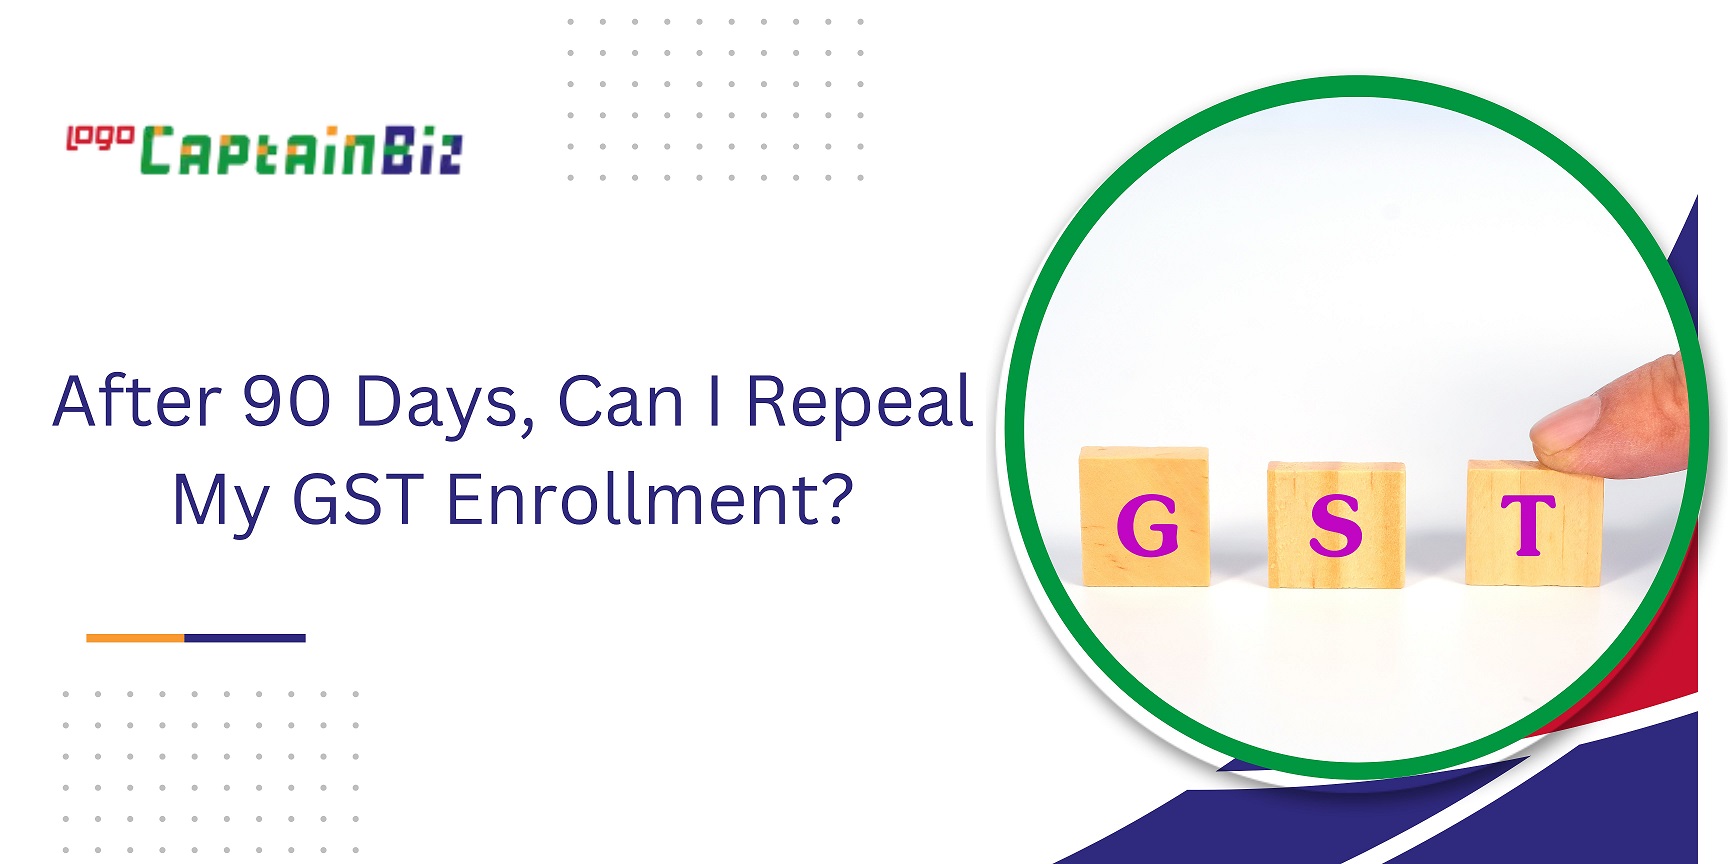 CaptainBiz: After 90 Days, Can I Repeal My GST Enrollment